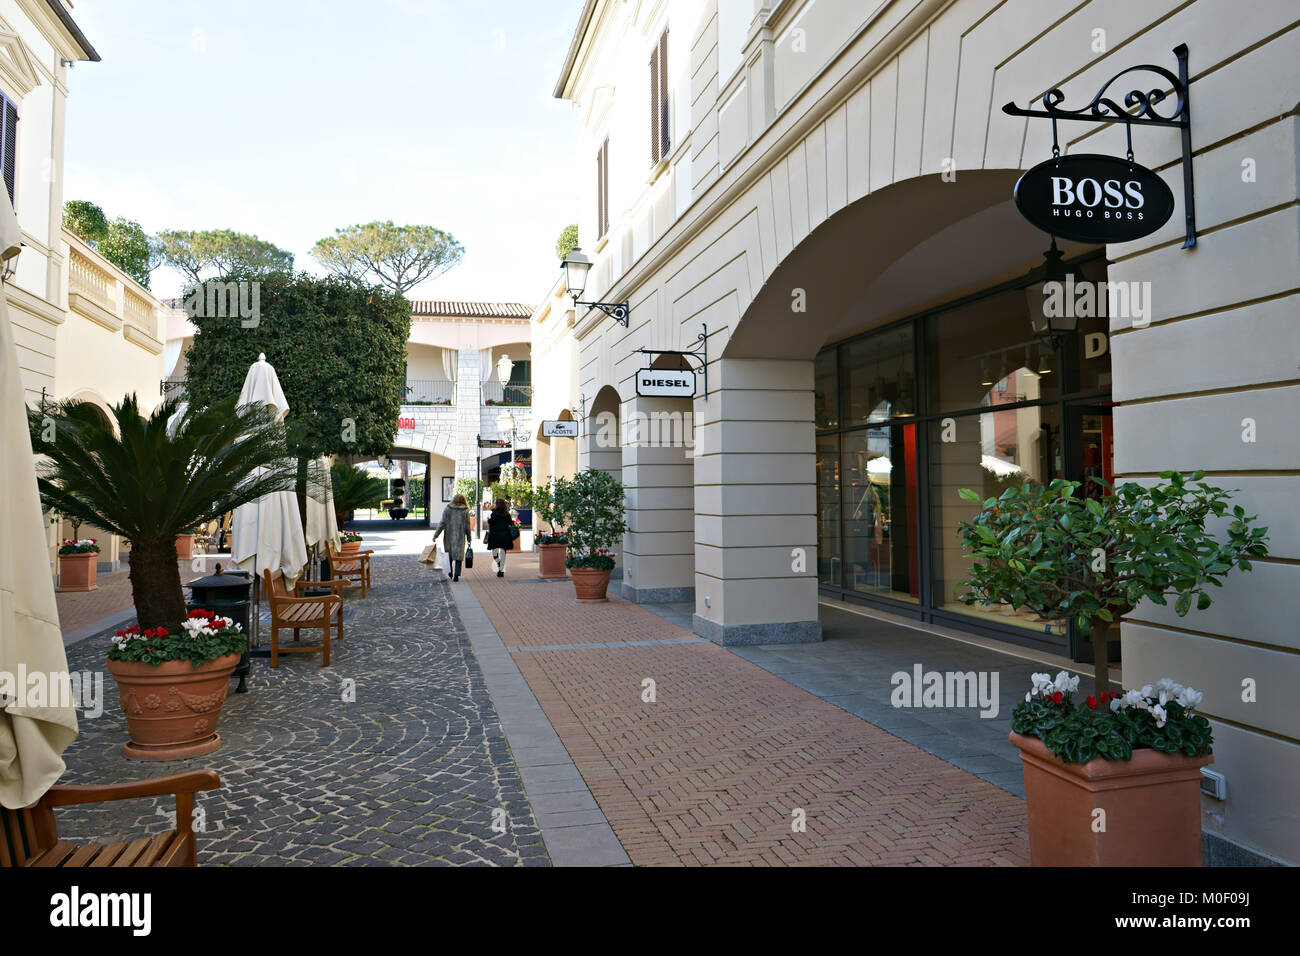 Hugo Boss Outlet High Resolution Stock Photography and Images - Alamy